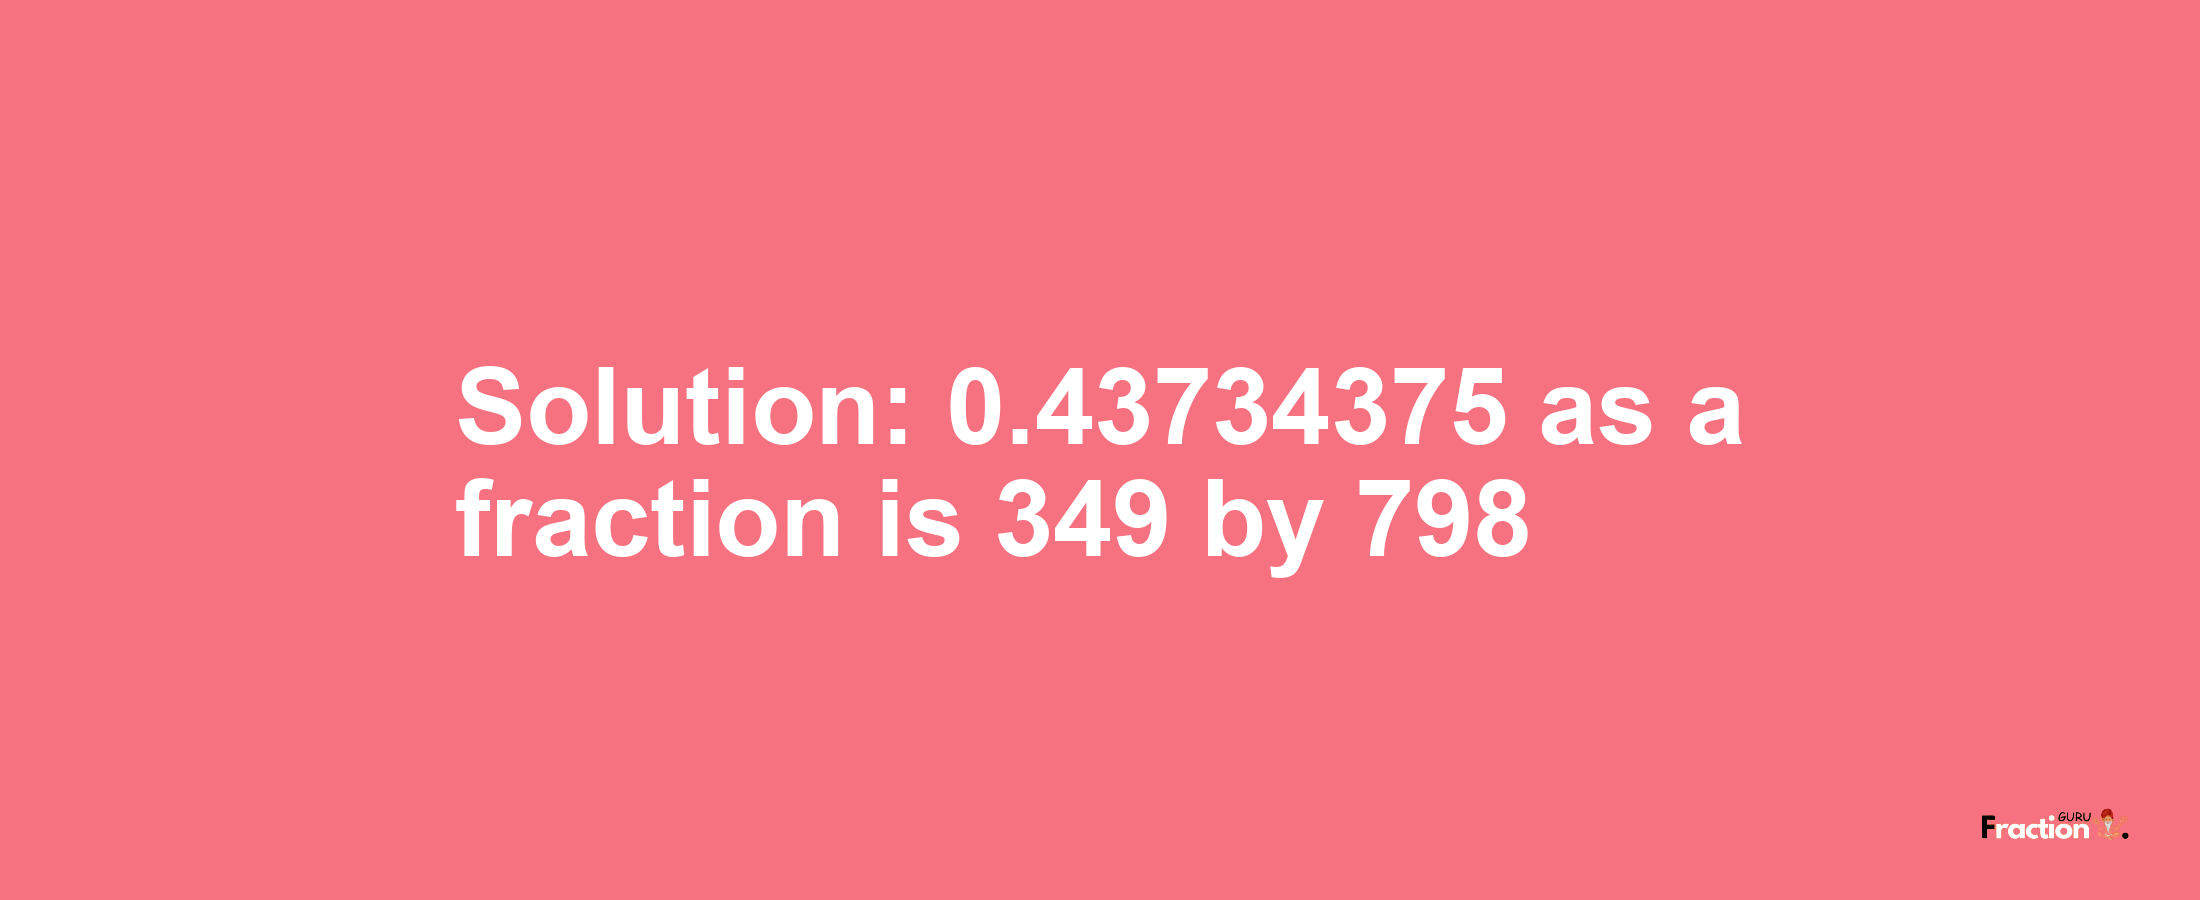 Solution:0.43734375 as a fraction is 349/798